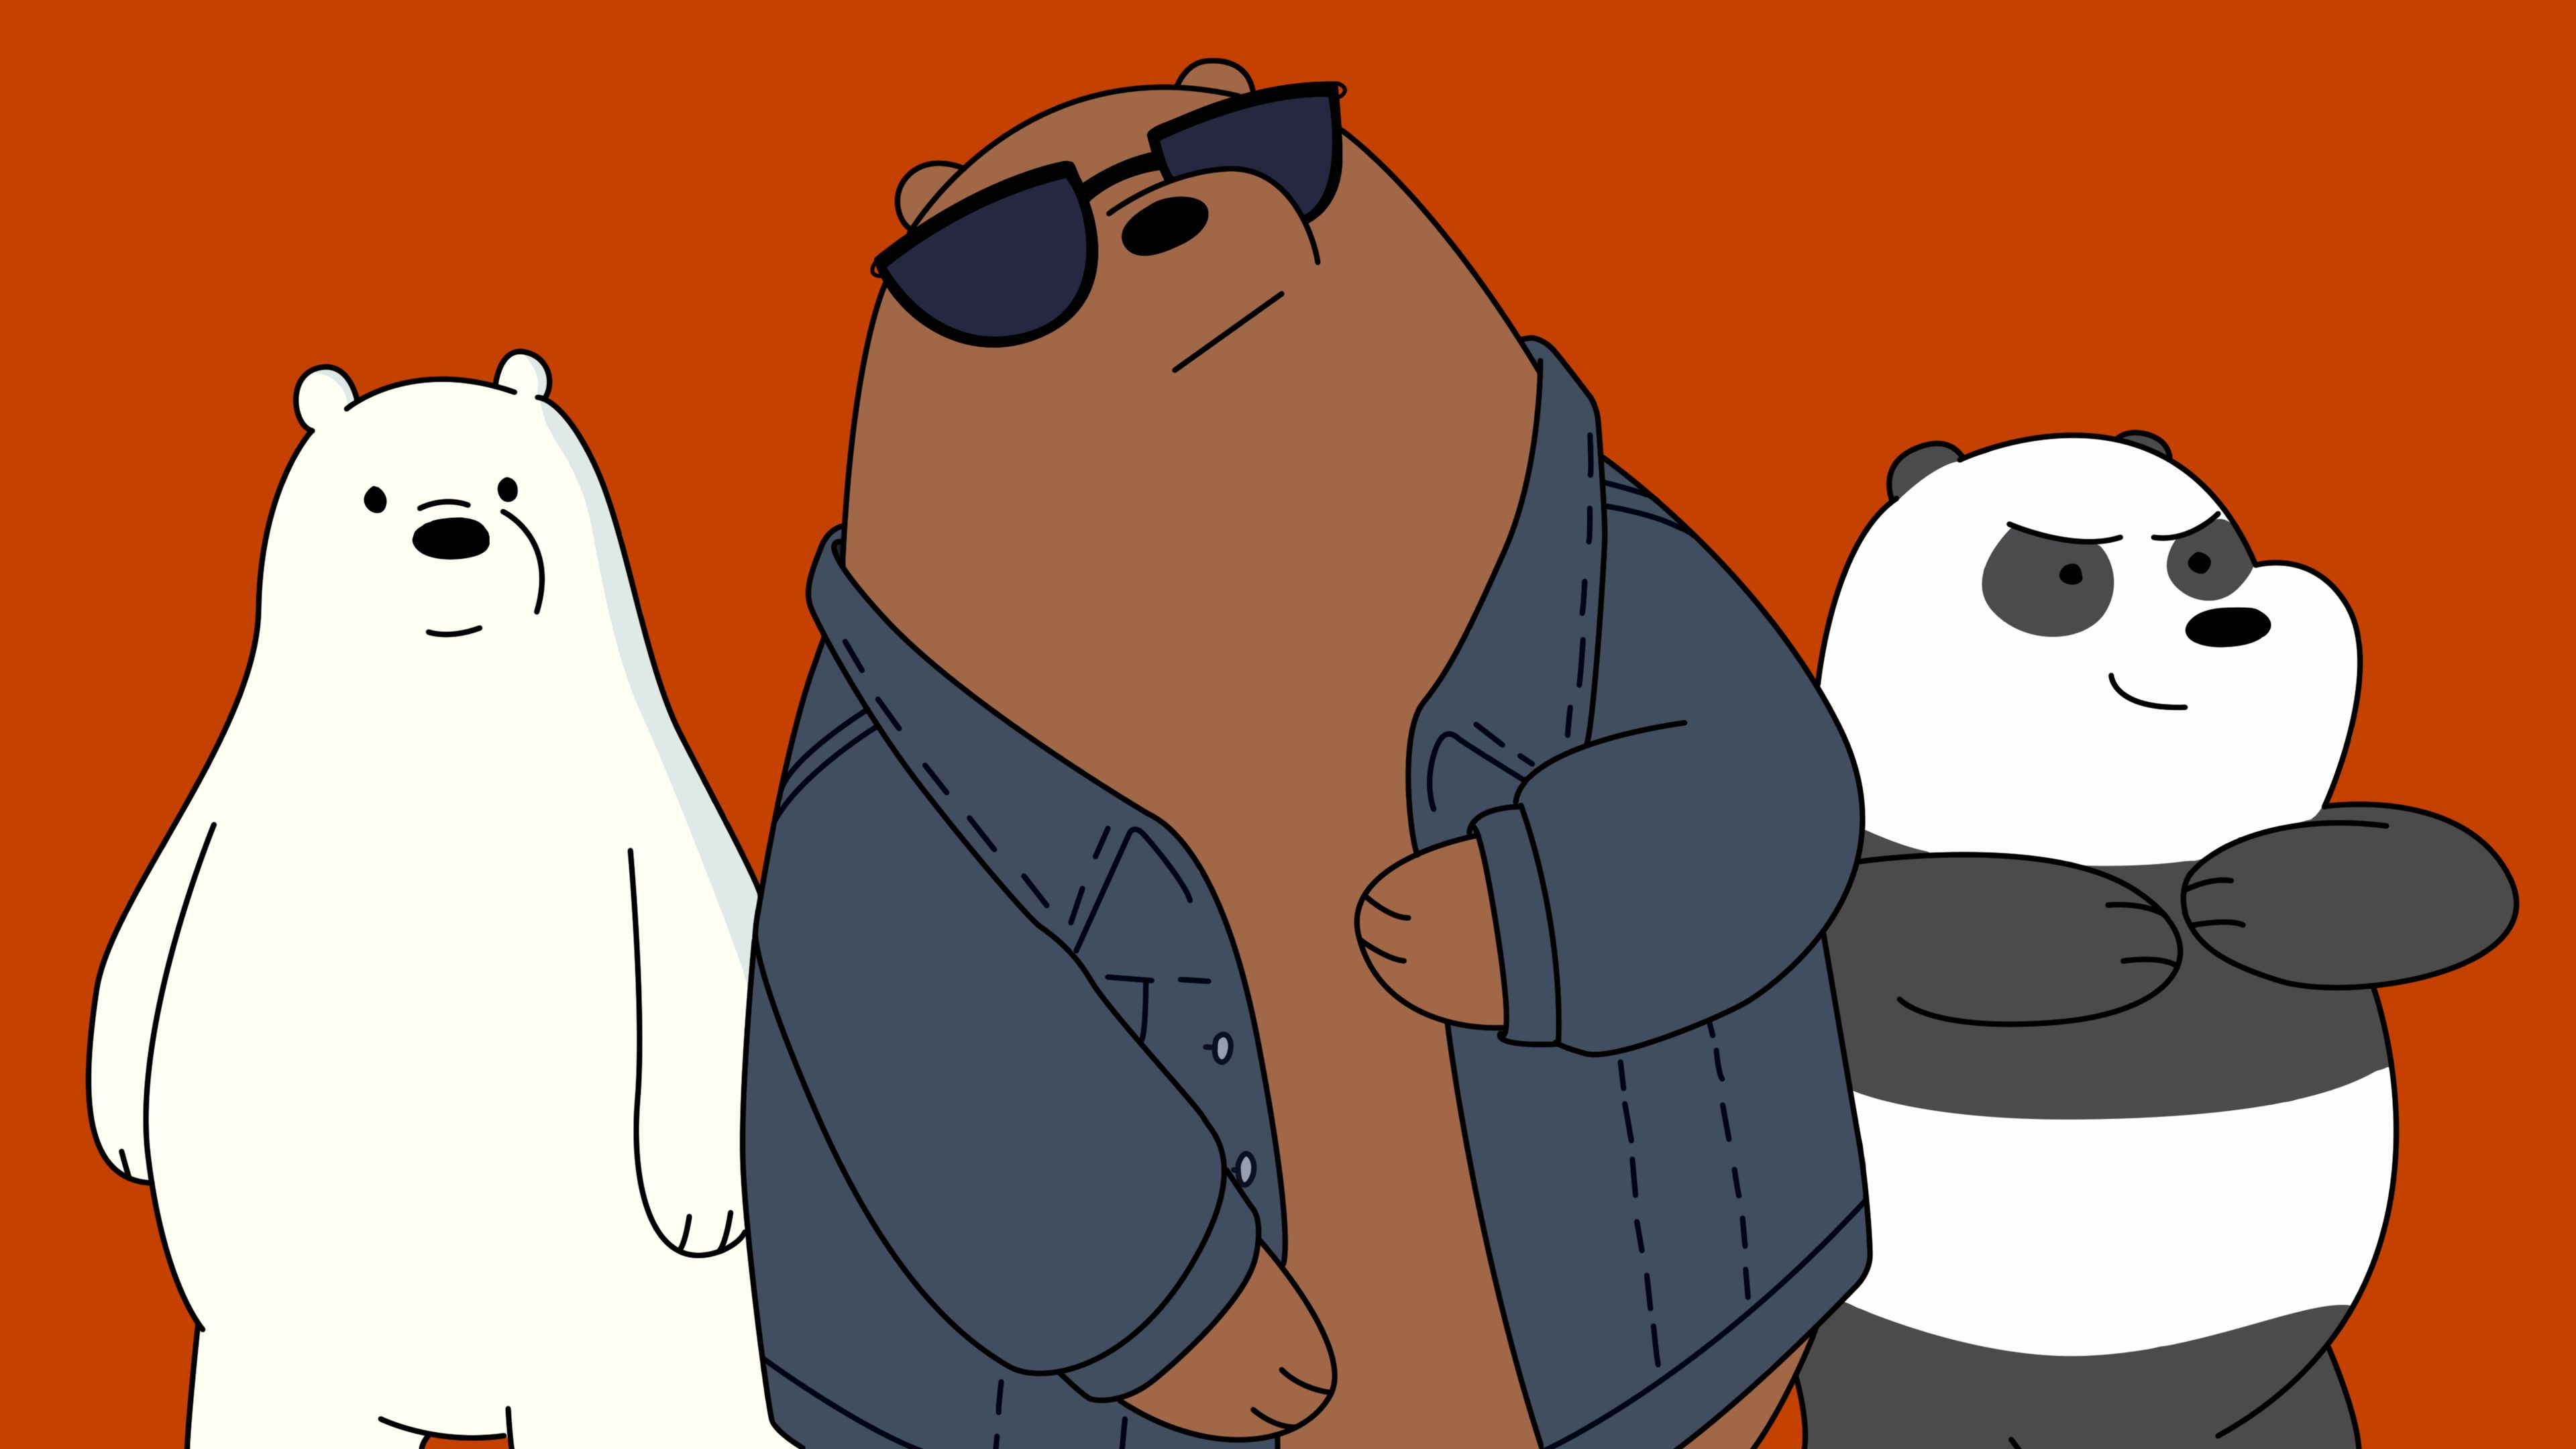 A cartoon bear, panda and grizzly standing together - We Bare Bears